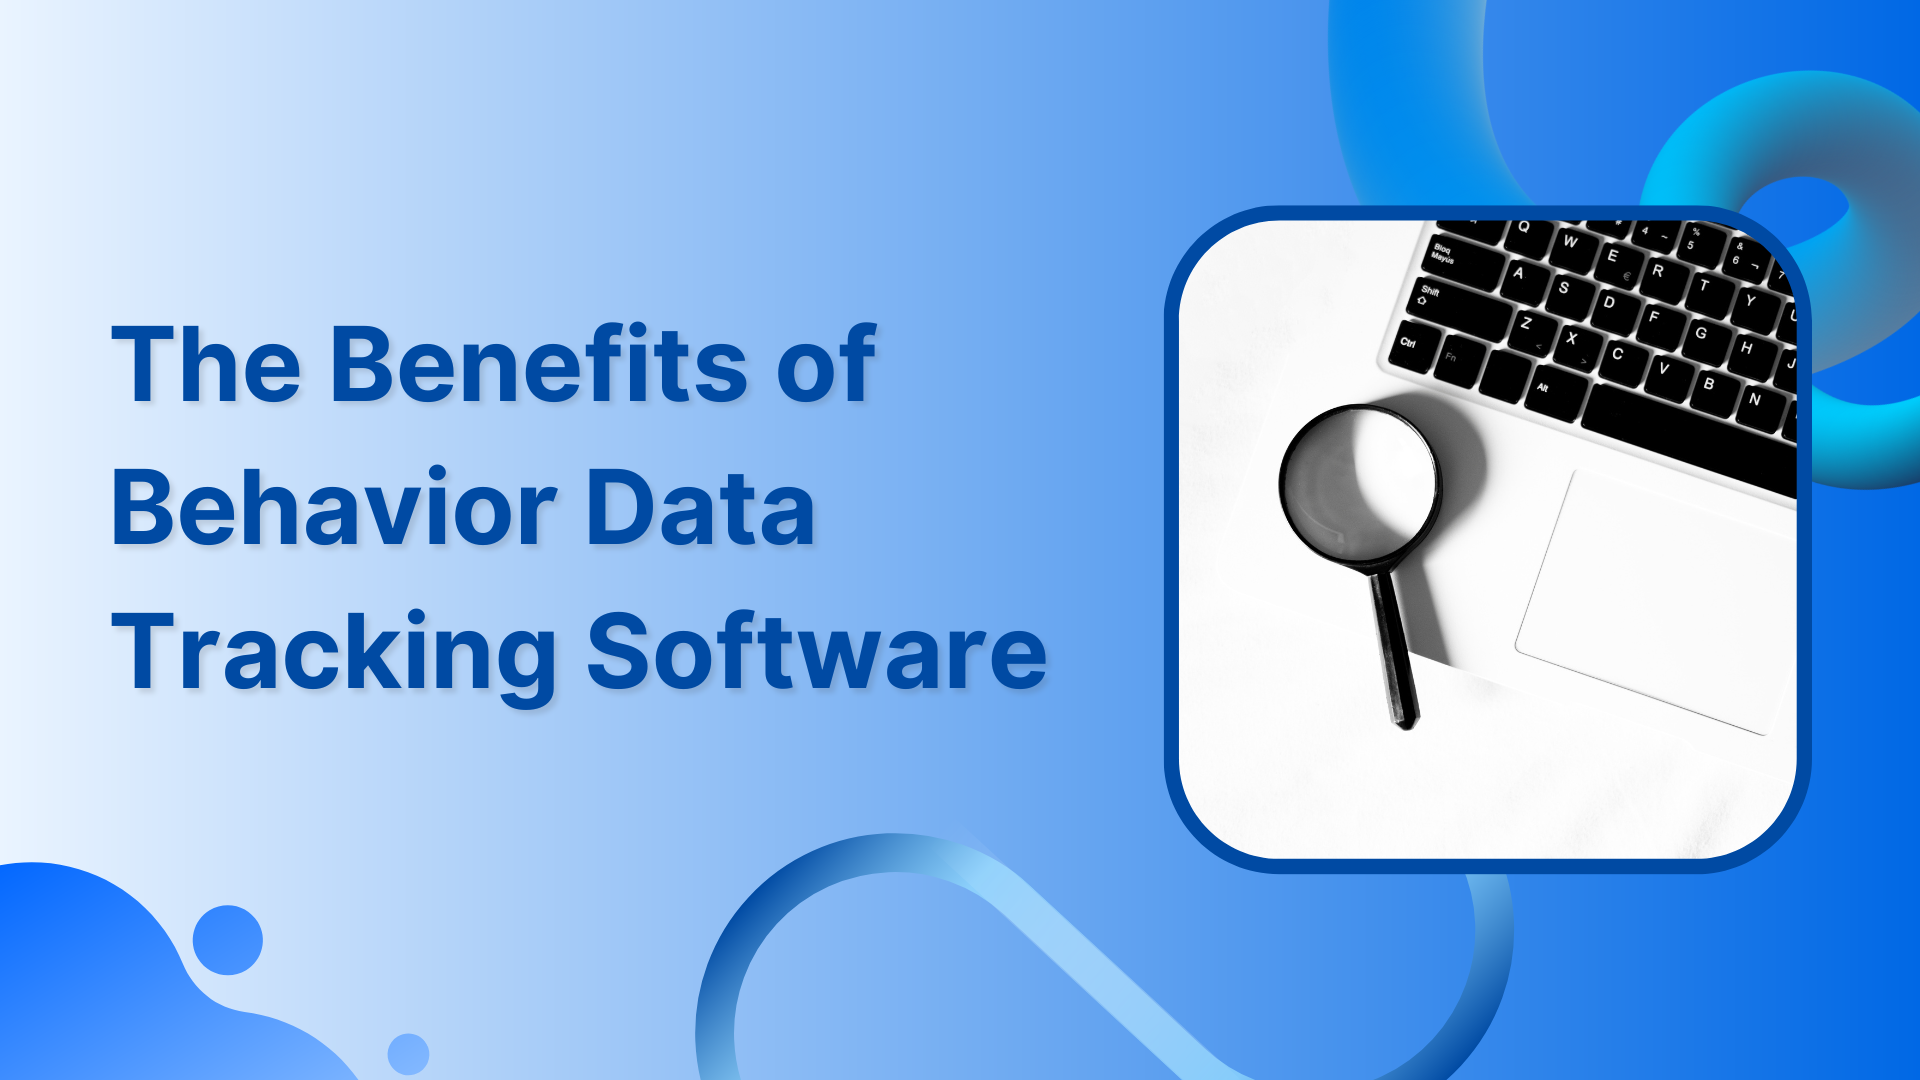 The Benefits of Behavior Data Tracking Software